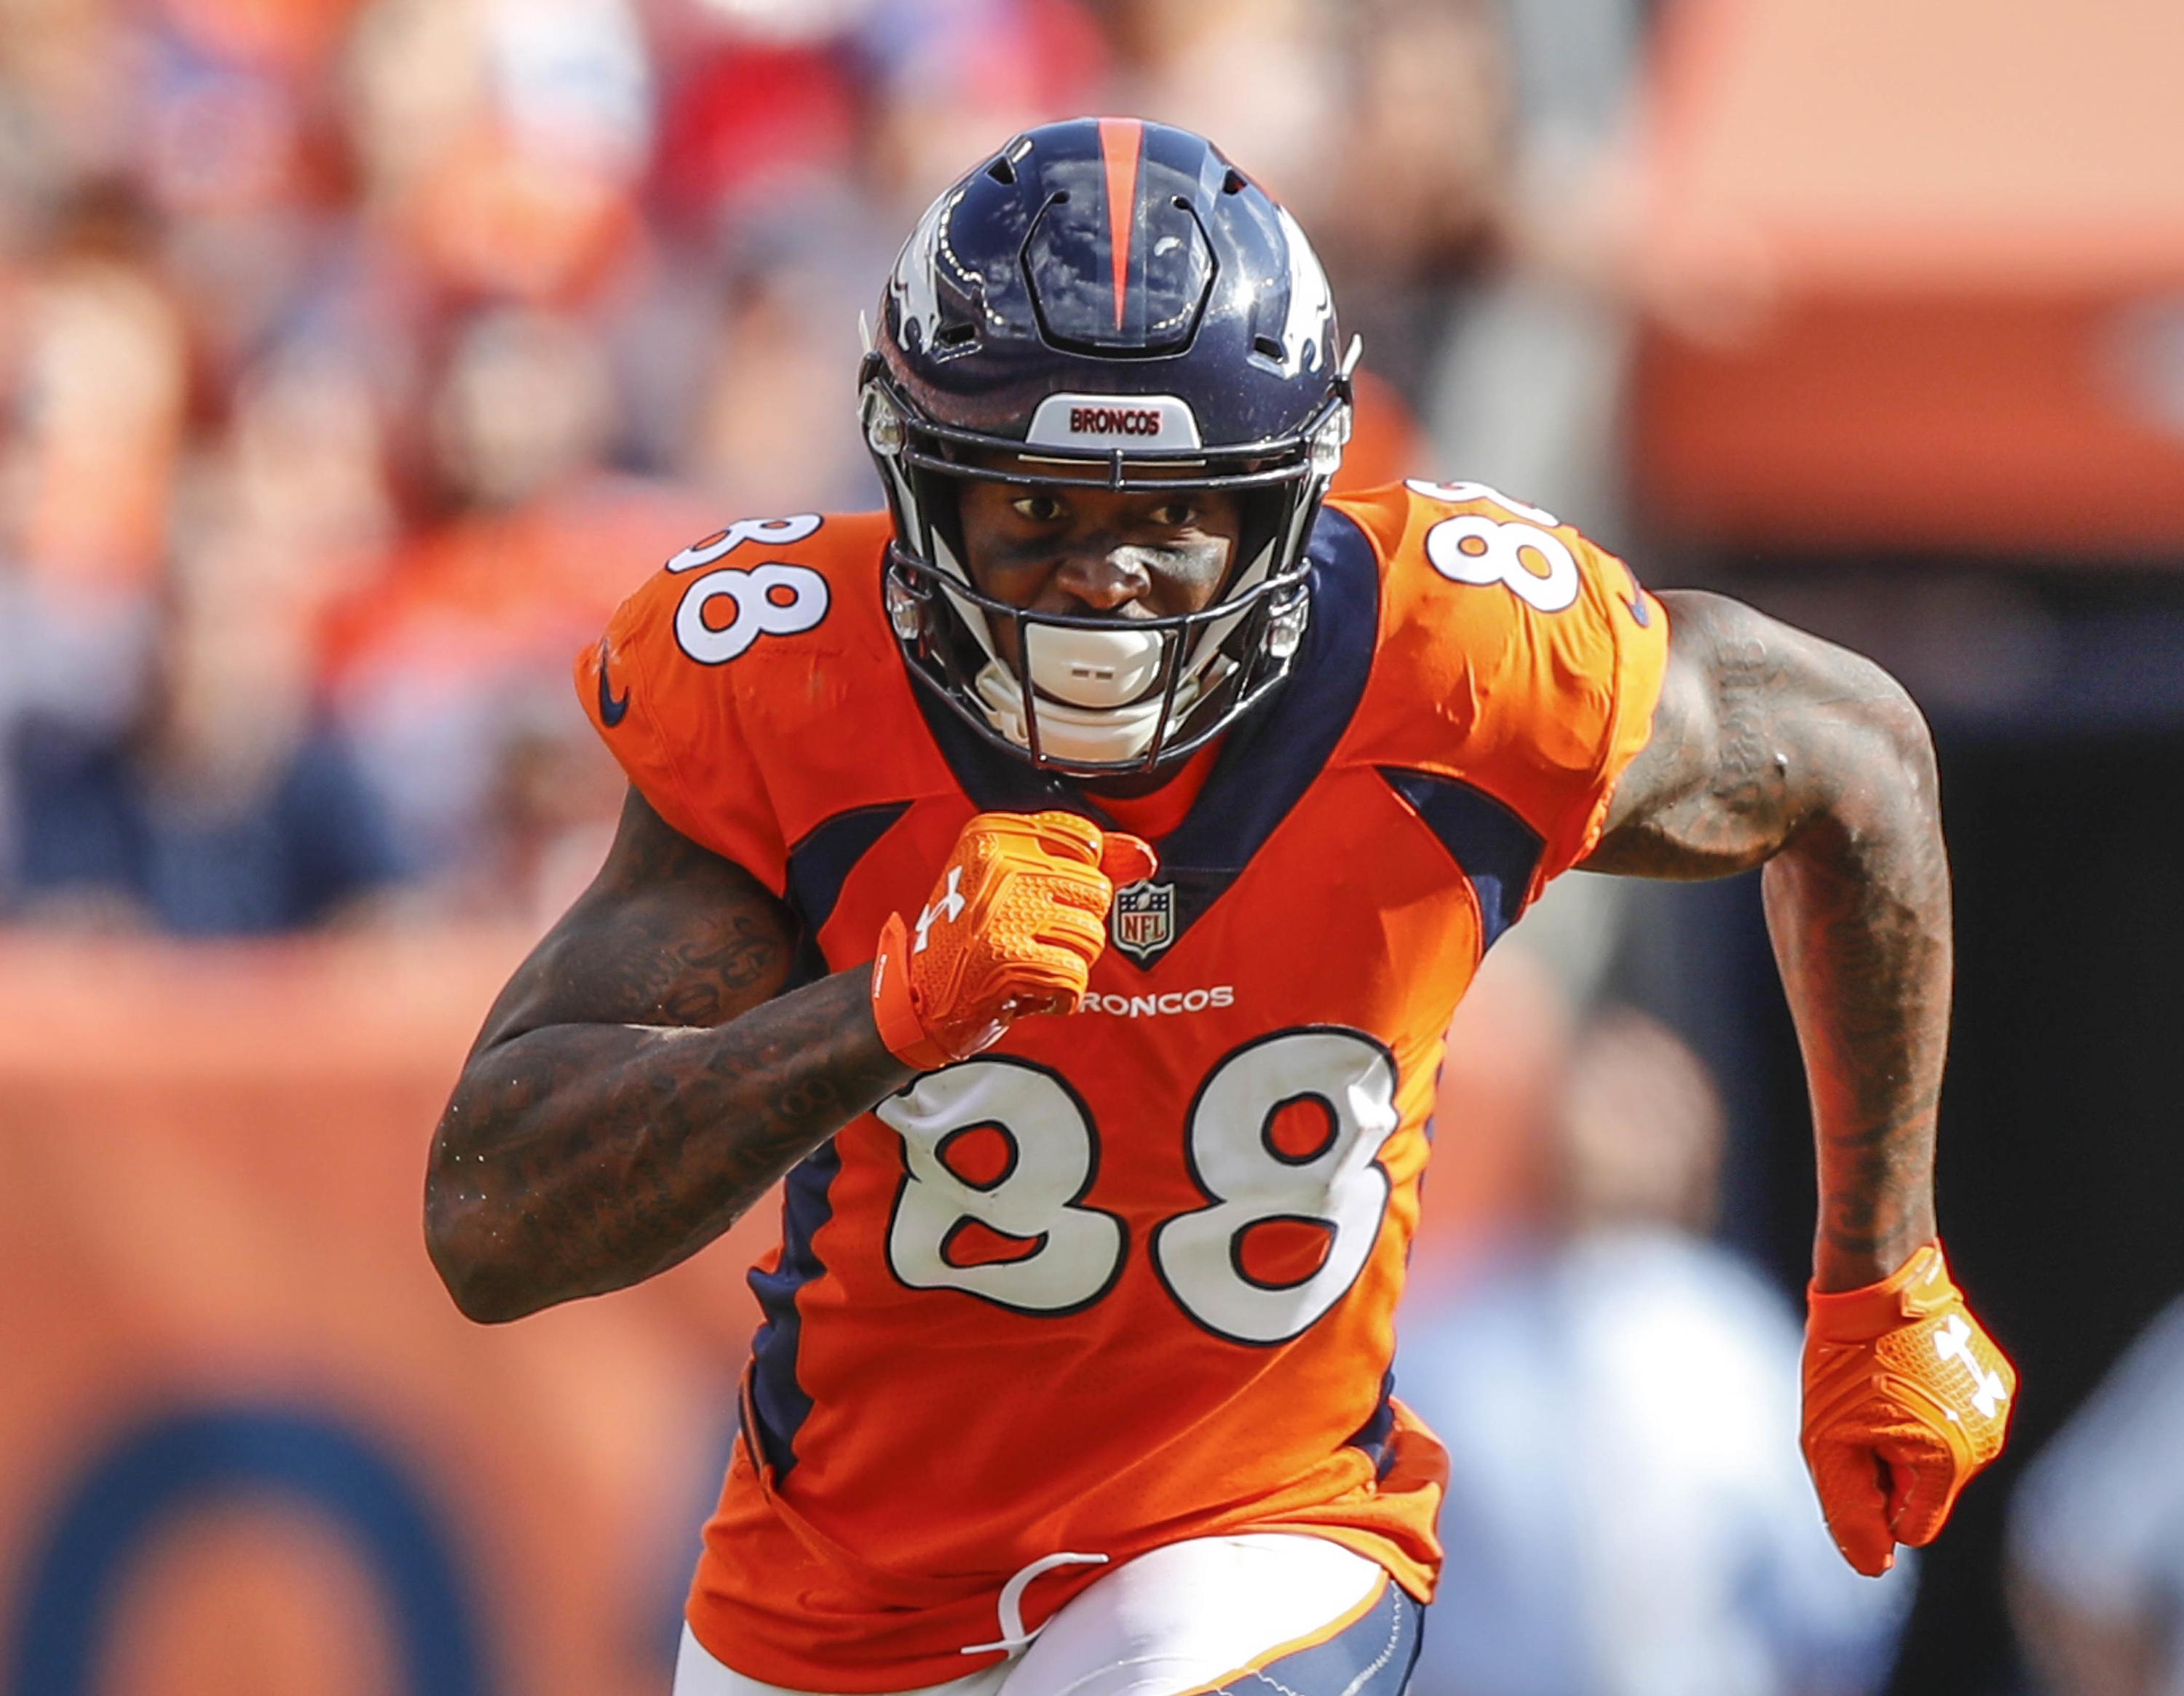 Former NFL receiver Demaryius Thomas’ family says he had CTE